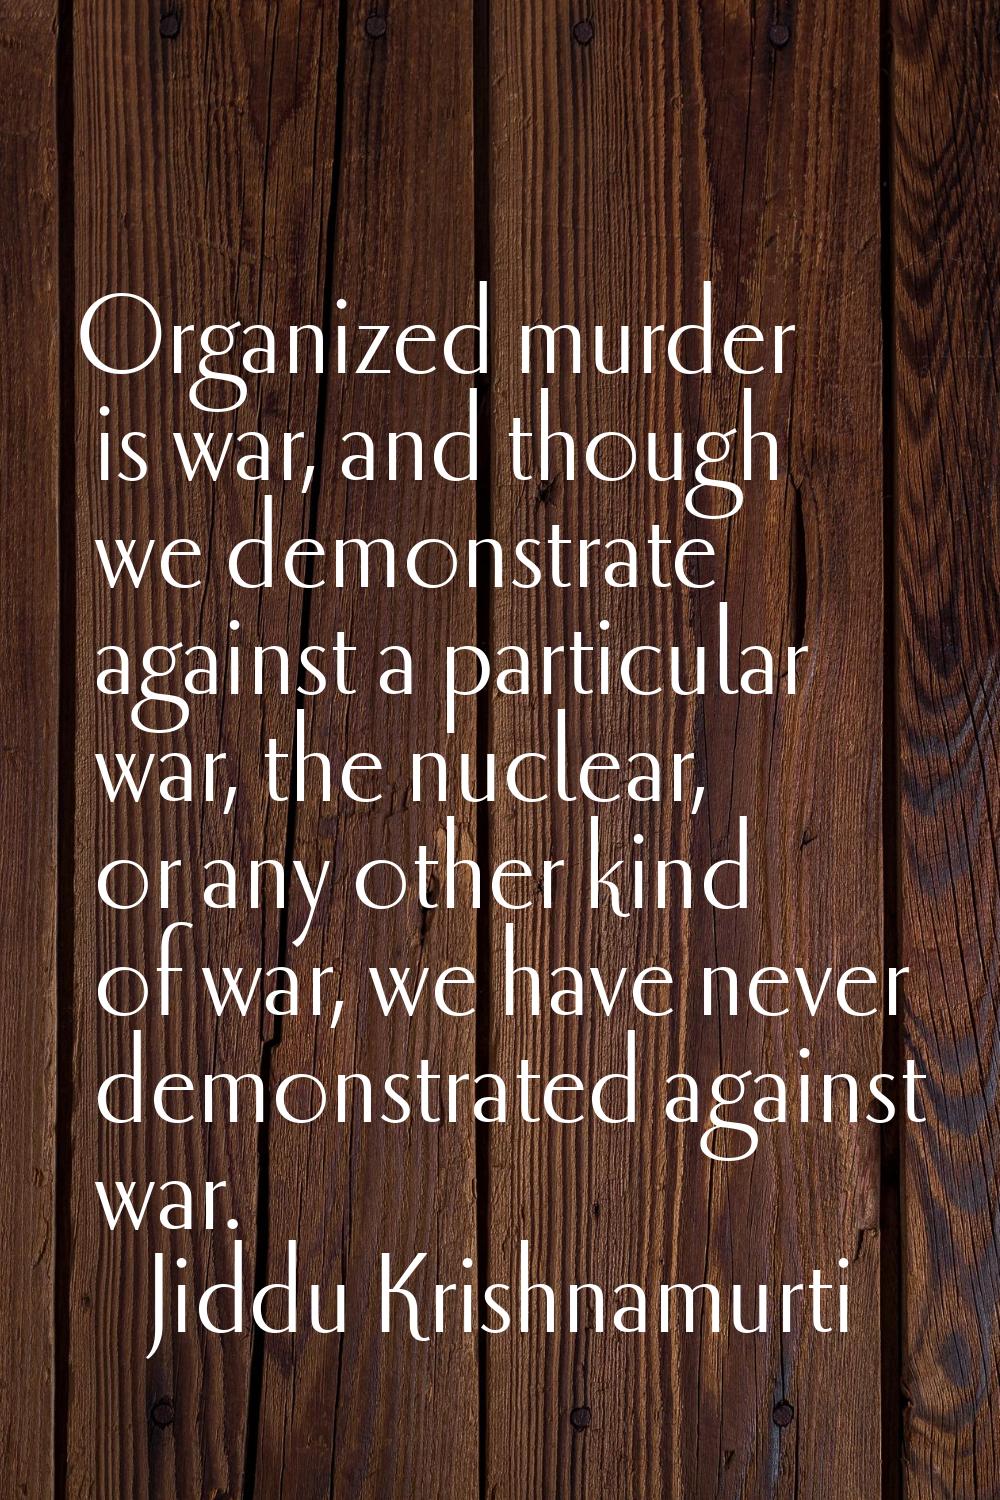 Organized murder is war, and though we demonstrate against a particular war, the nuclear, or any ot